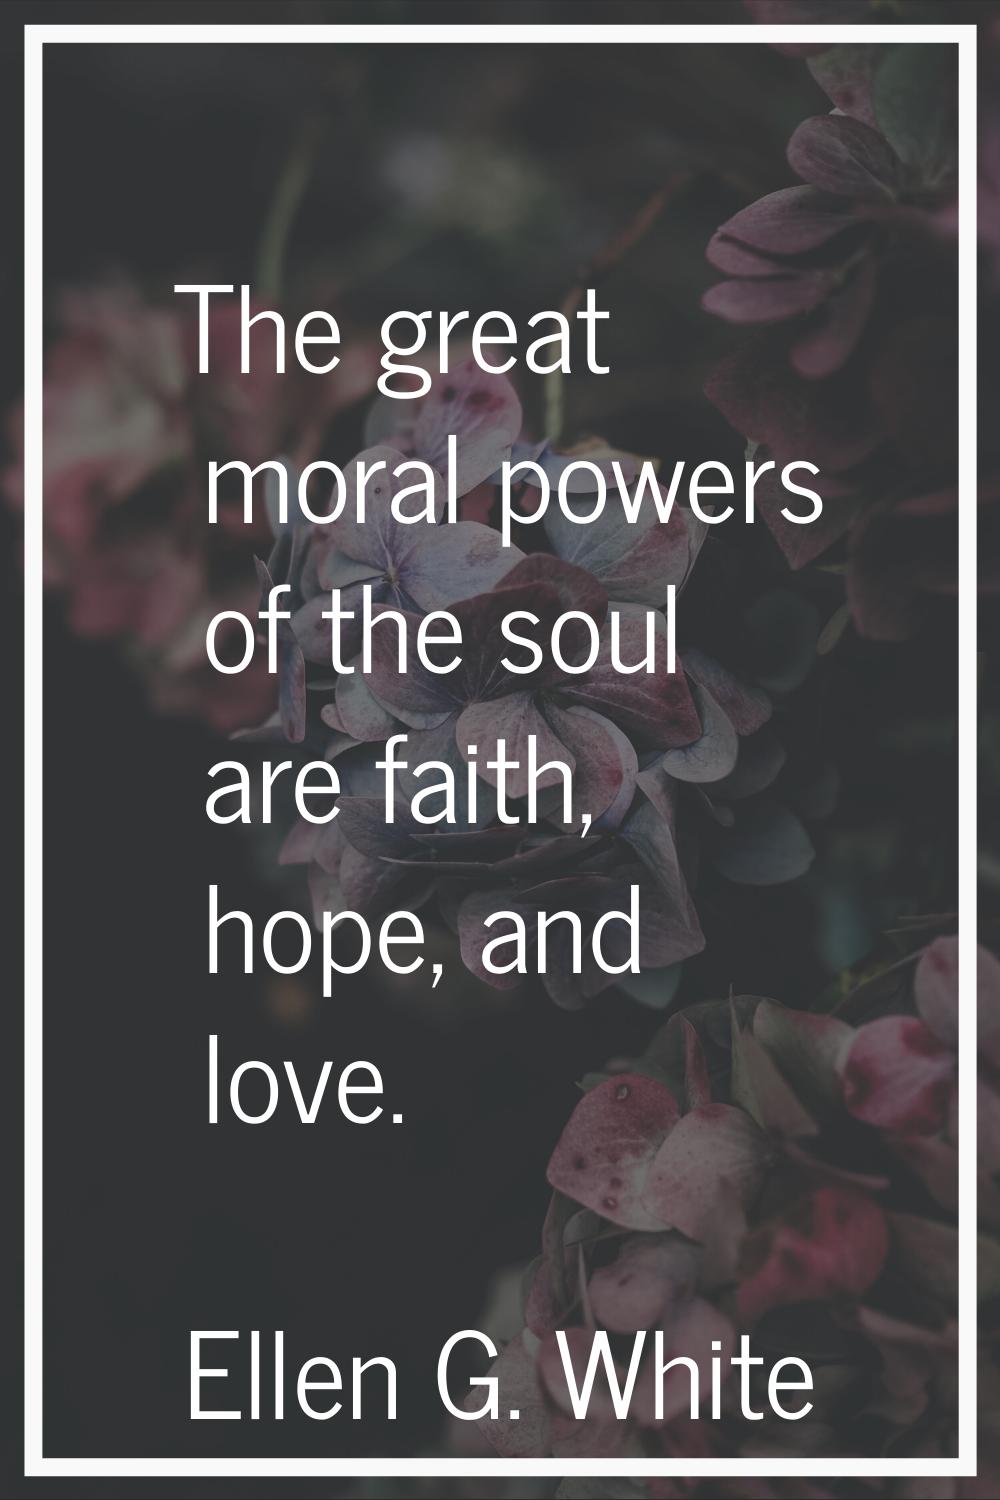 The great moral powers of the soul are faith, hope, and love.